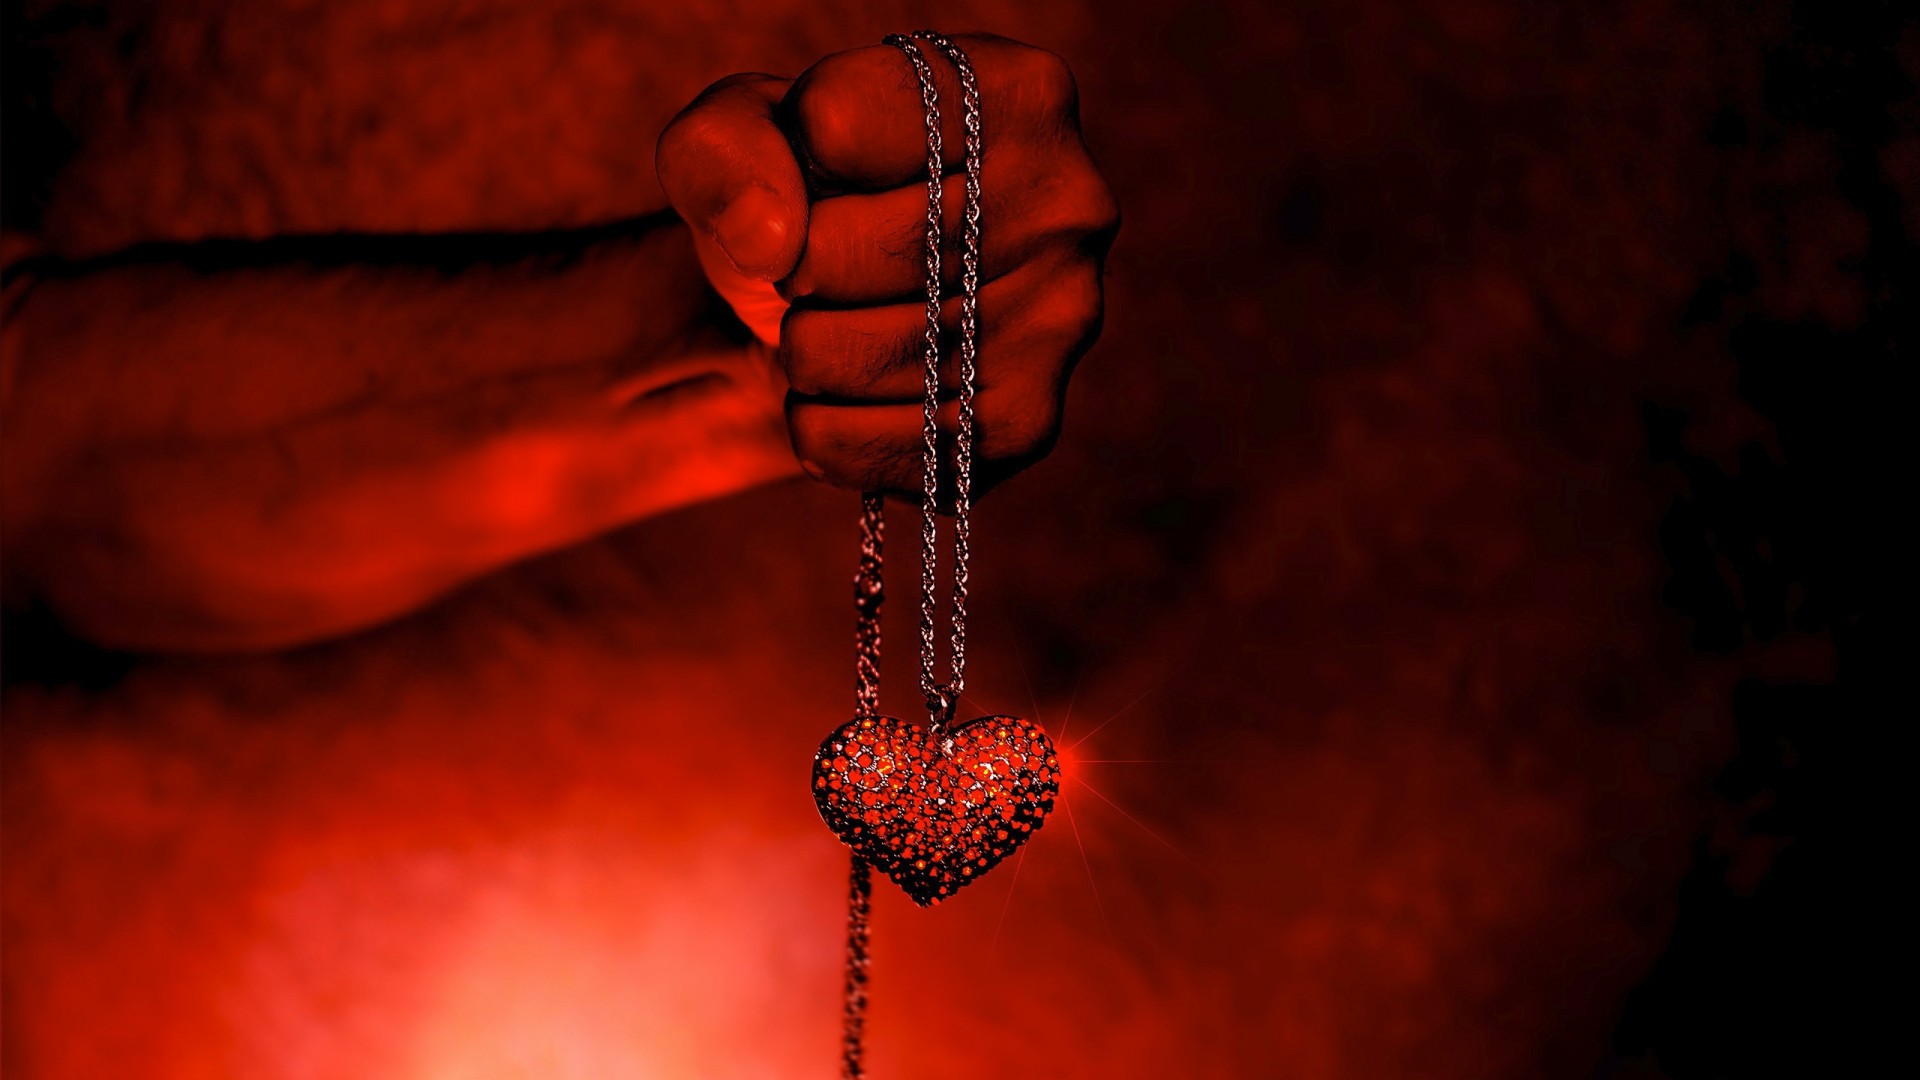 artistic, love, chain, hand, heart, red, sparkles